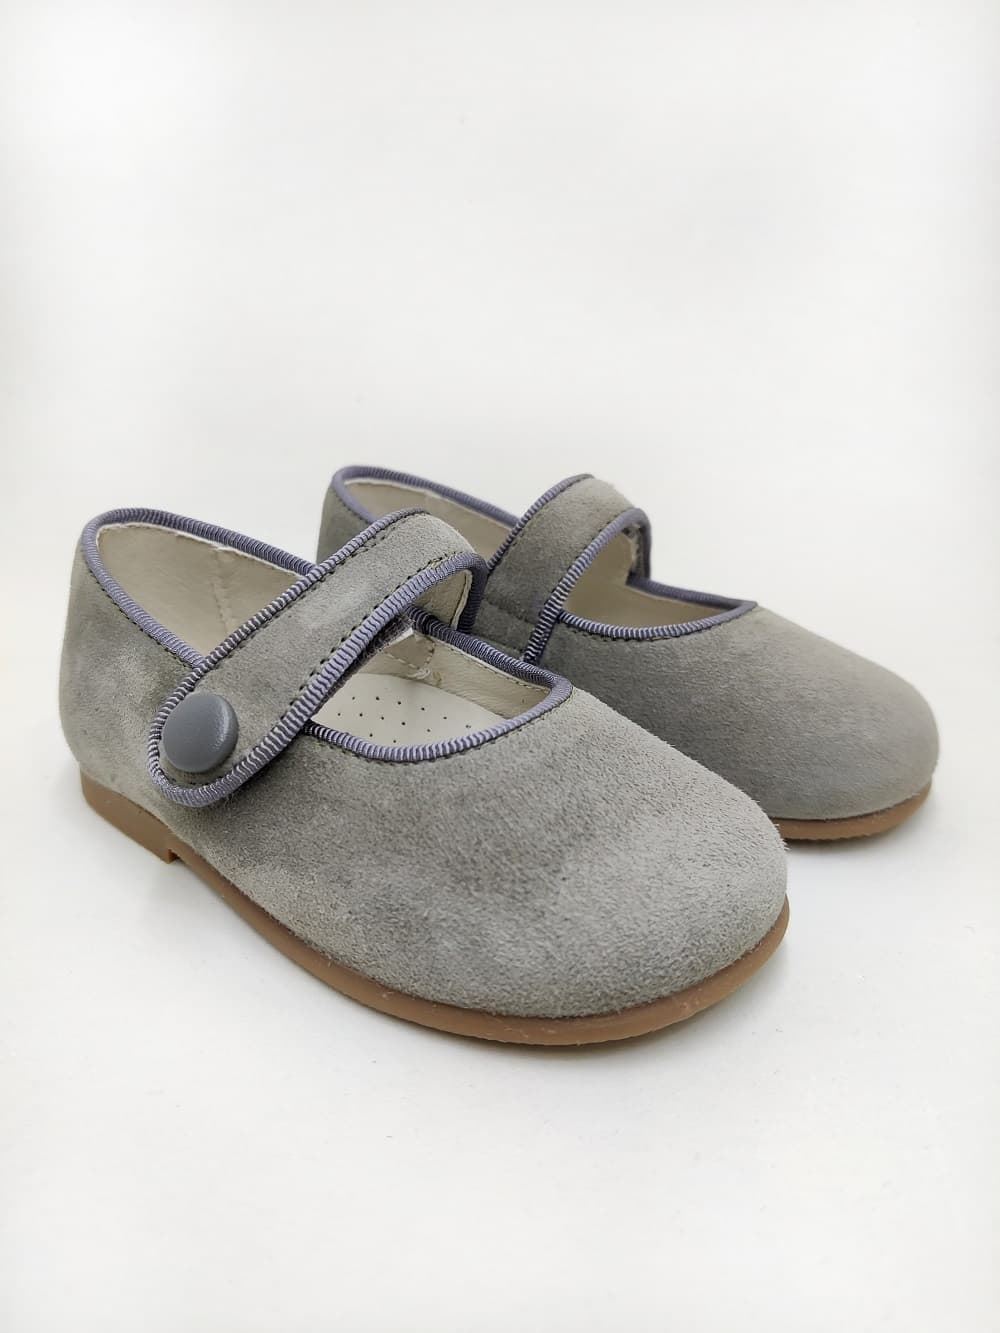 Pirufin (Piruflex) Mary Janes for baby girls in Gray suede - Image 1